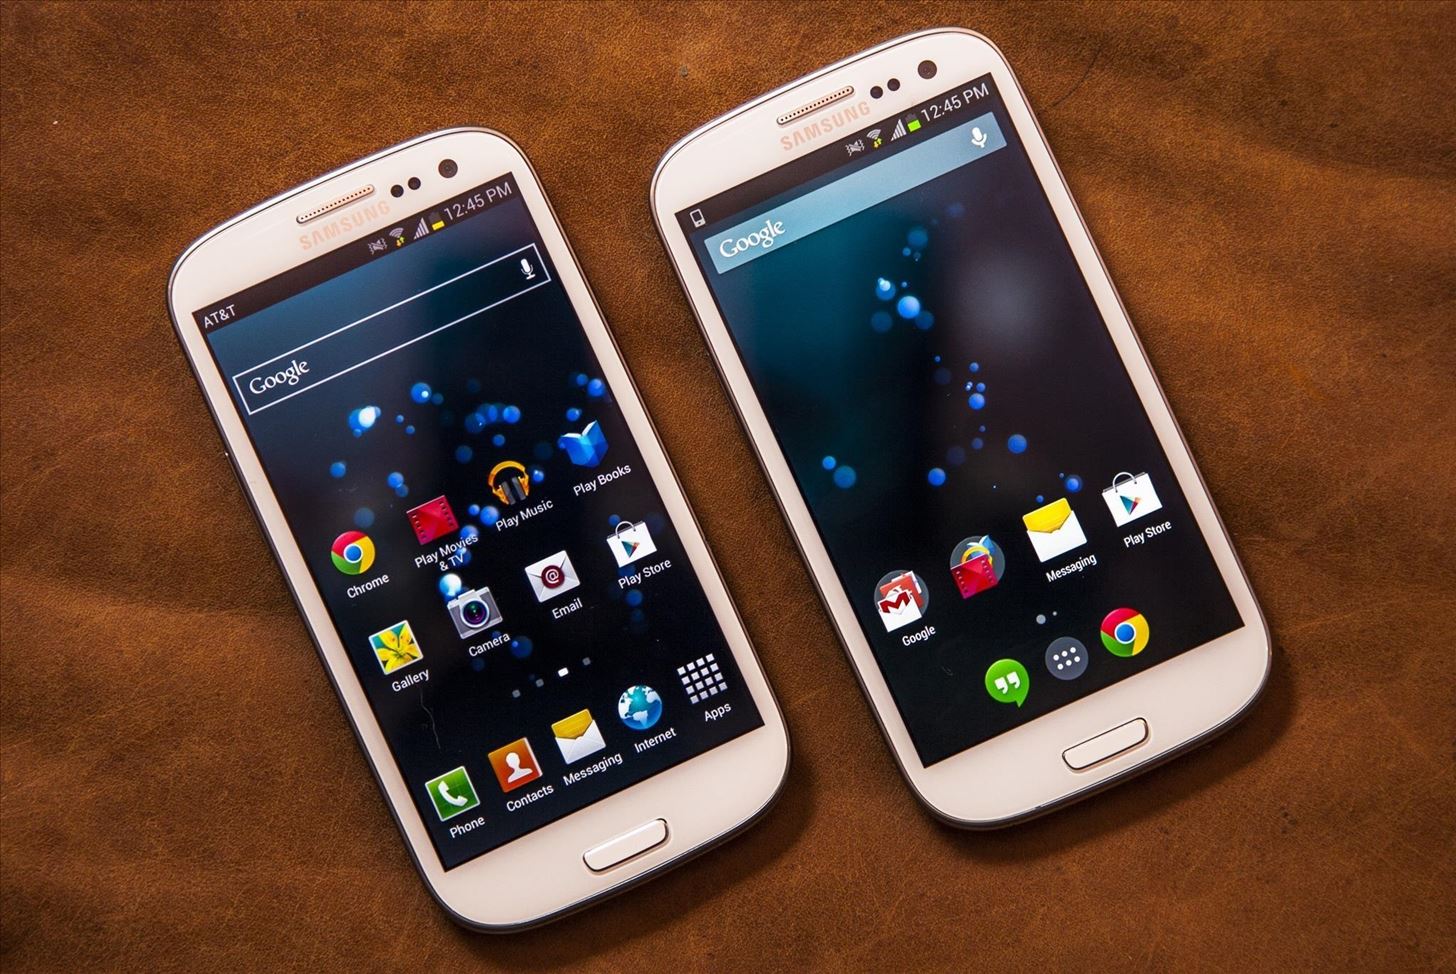 How to Install the Android 4.4 KitKat Home Launcher on Your Samsung Galaxy S3